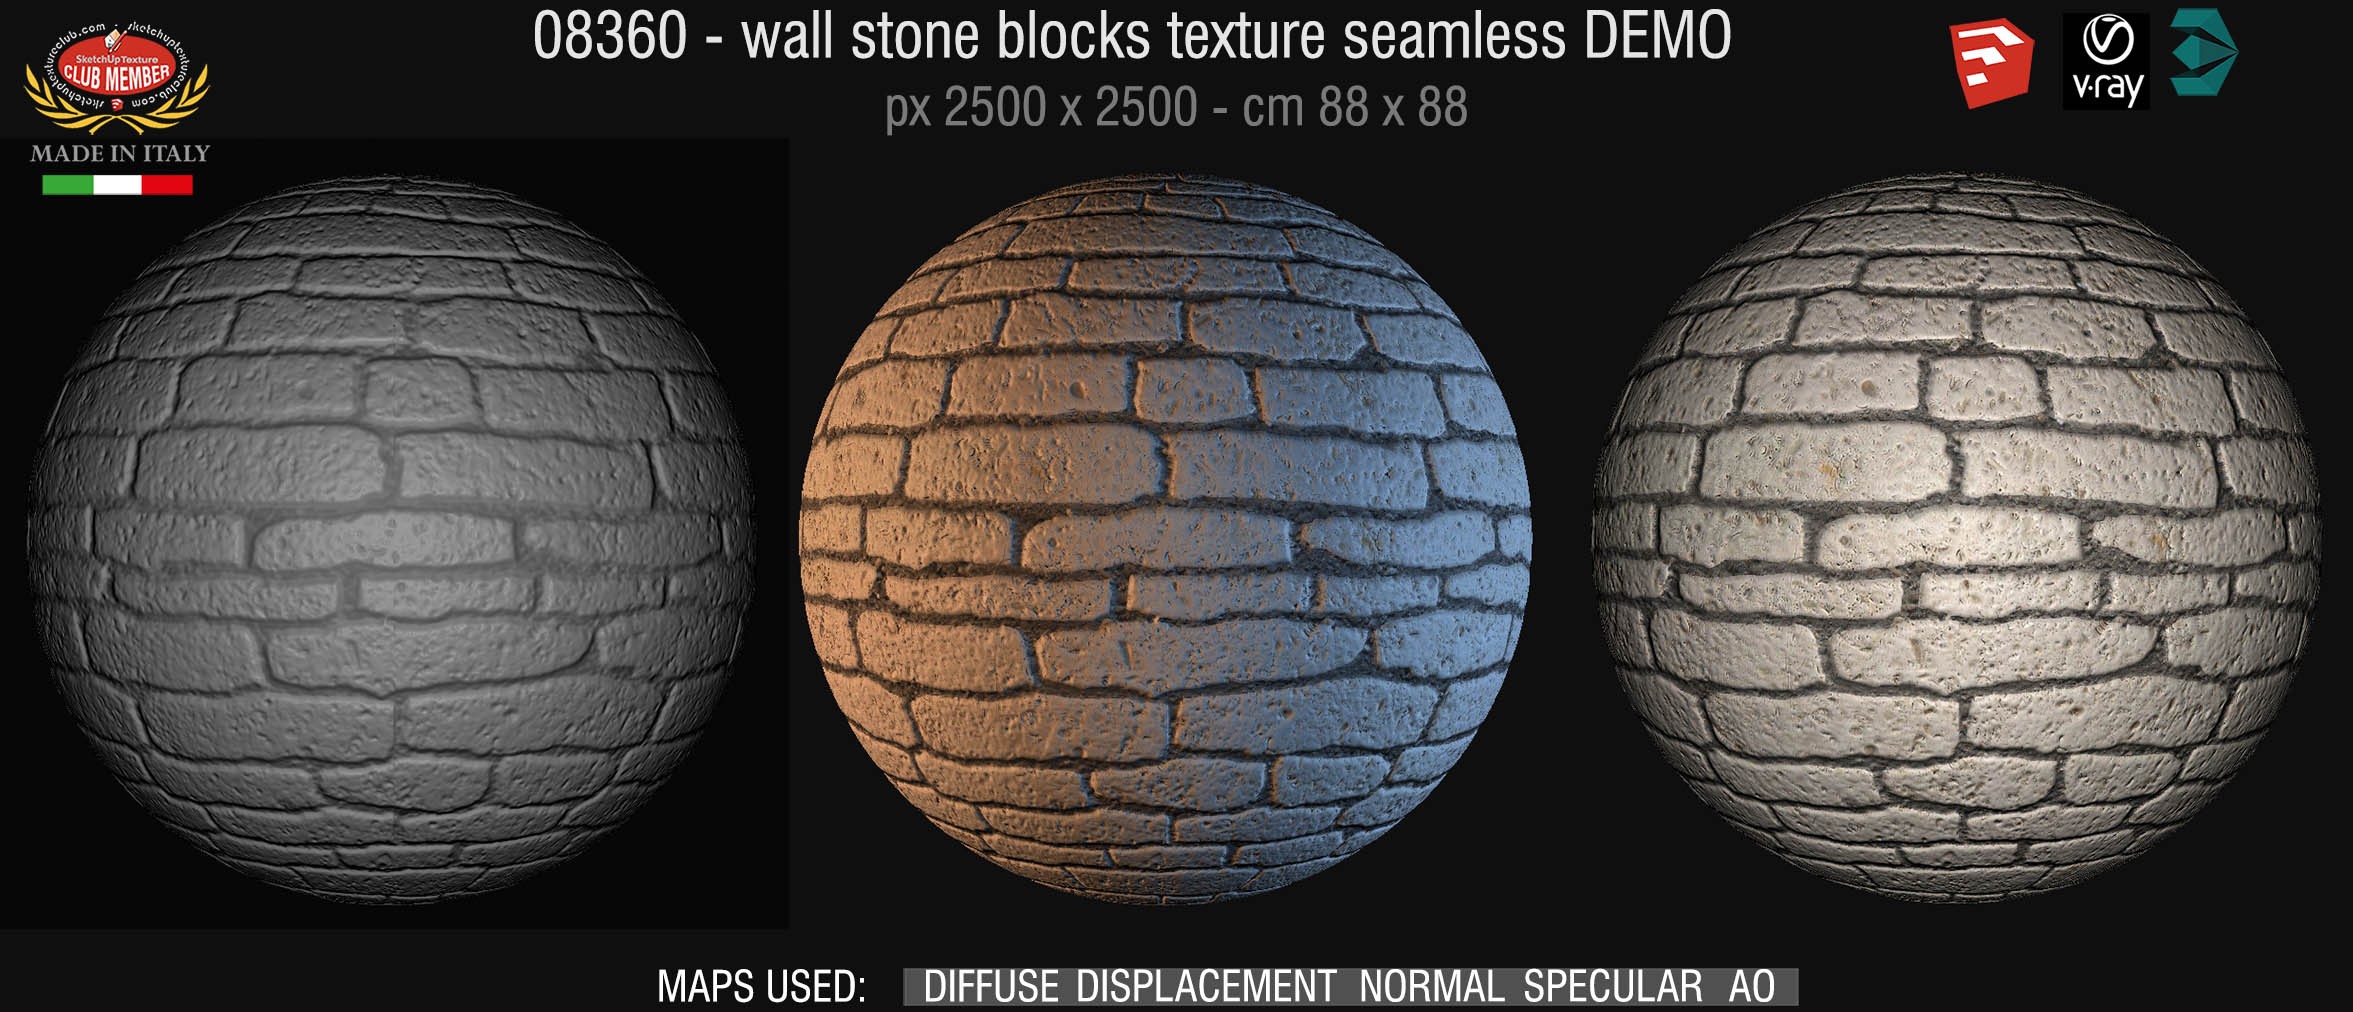 08360 HR Wall stone with regular blocks texture + maps DEMO